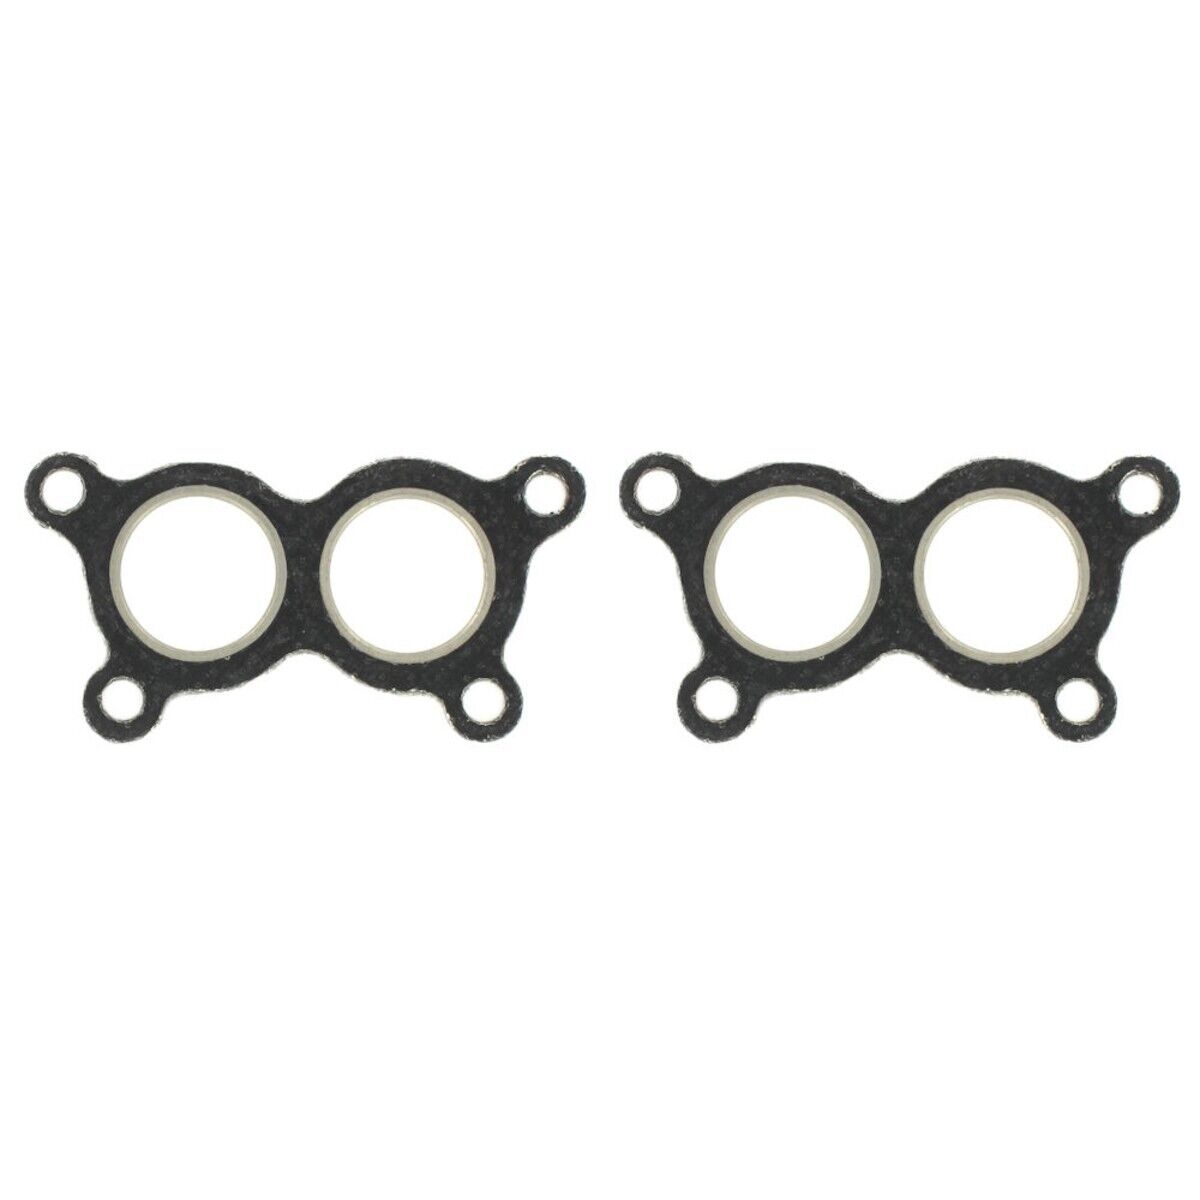 AMS3001 APEX Set Exhaust Manifold Gaskets for Chevy Chevrolet Spectrum I-Mark